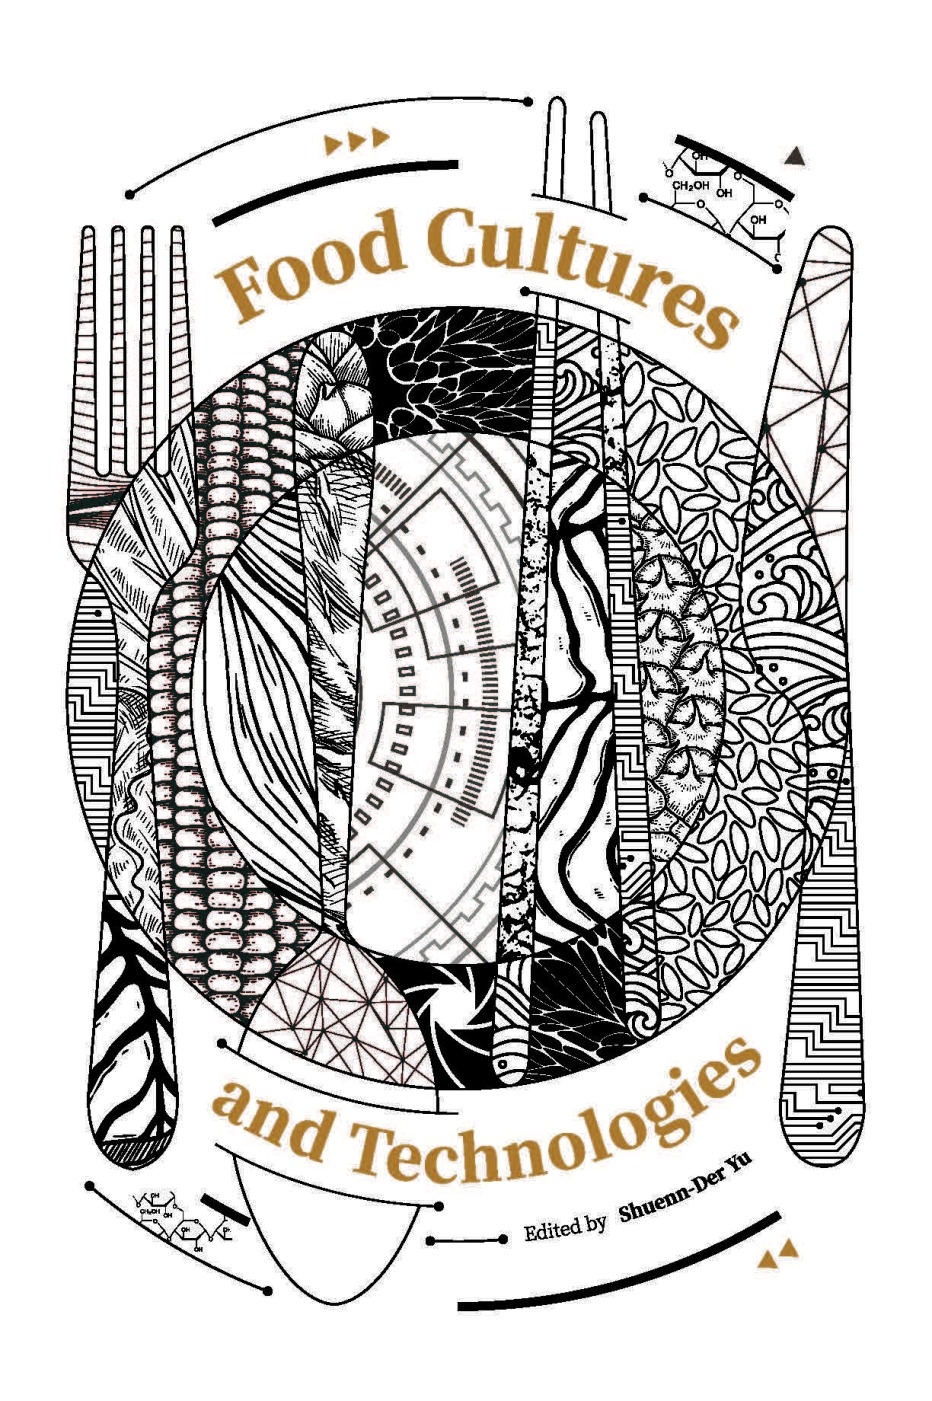 Food Cultures and Technologies